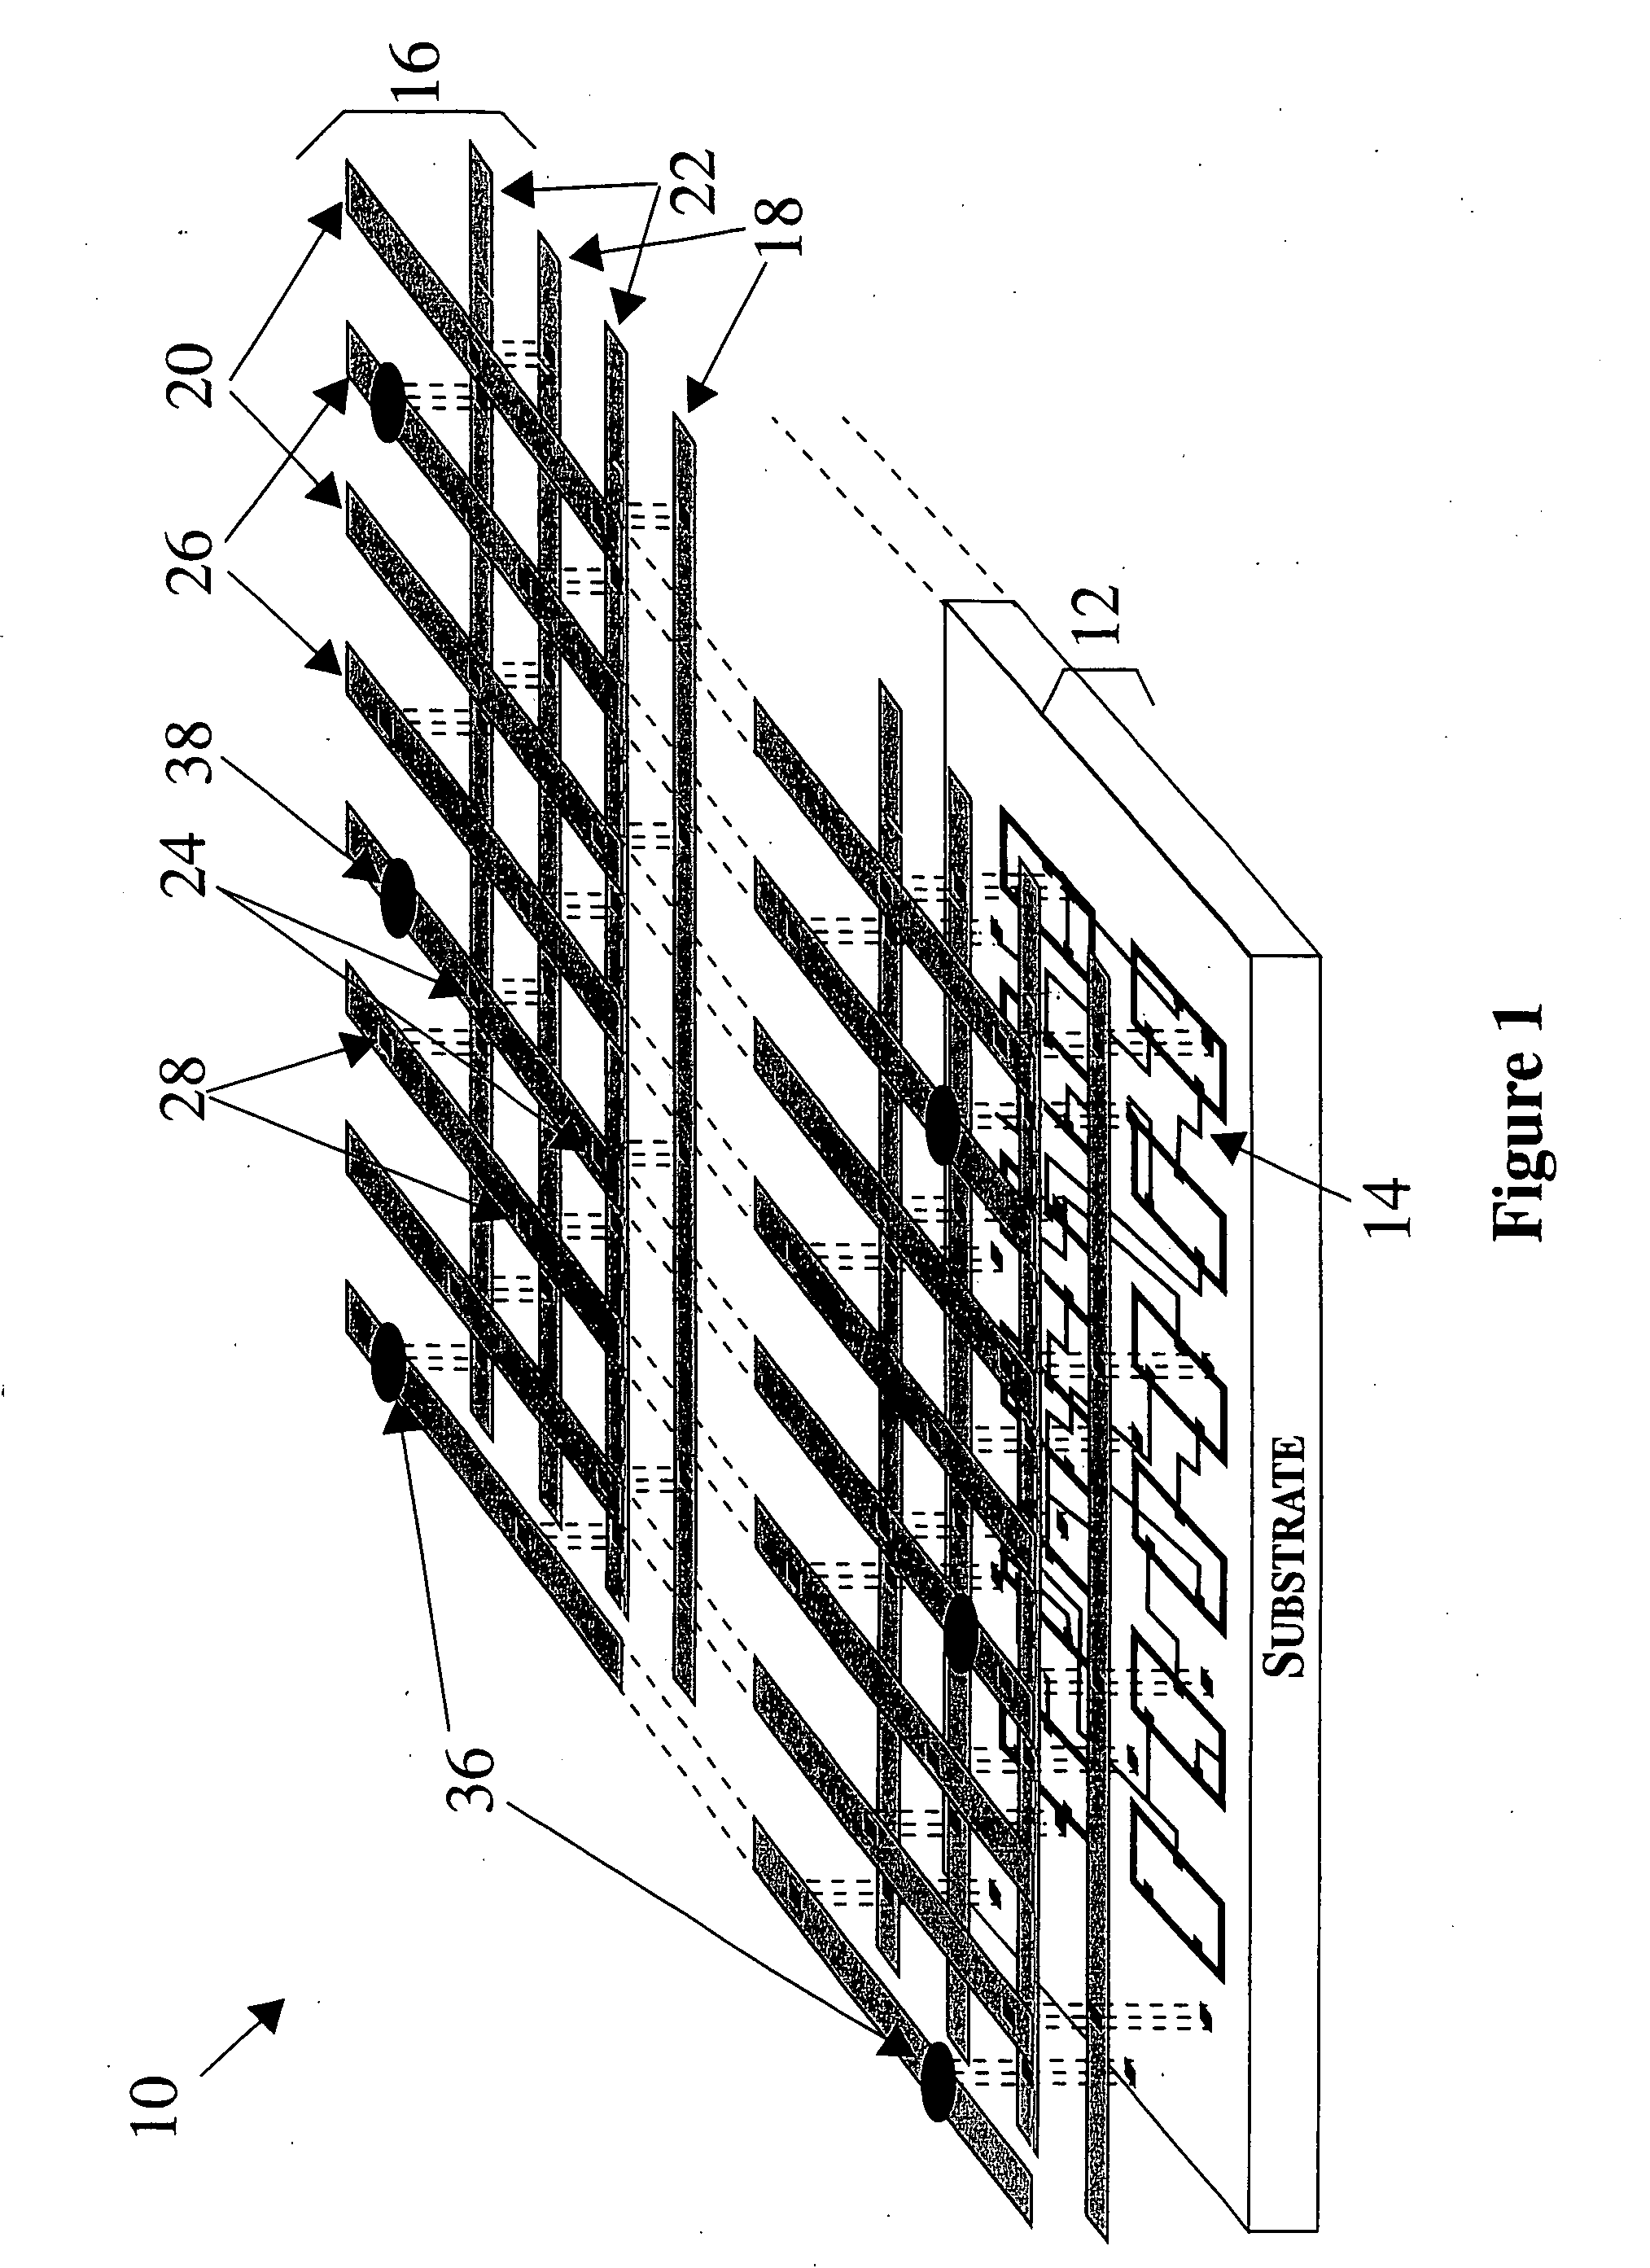 Method and system for identifying and locating defects in an integrated circuit